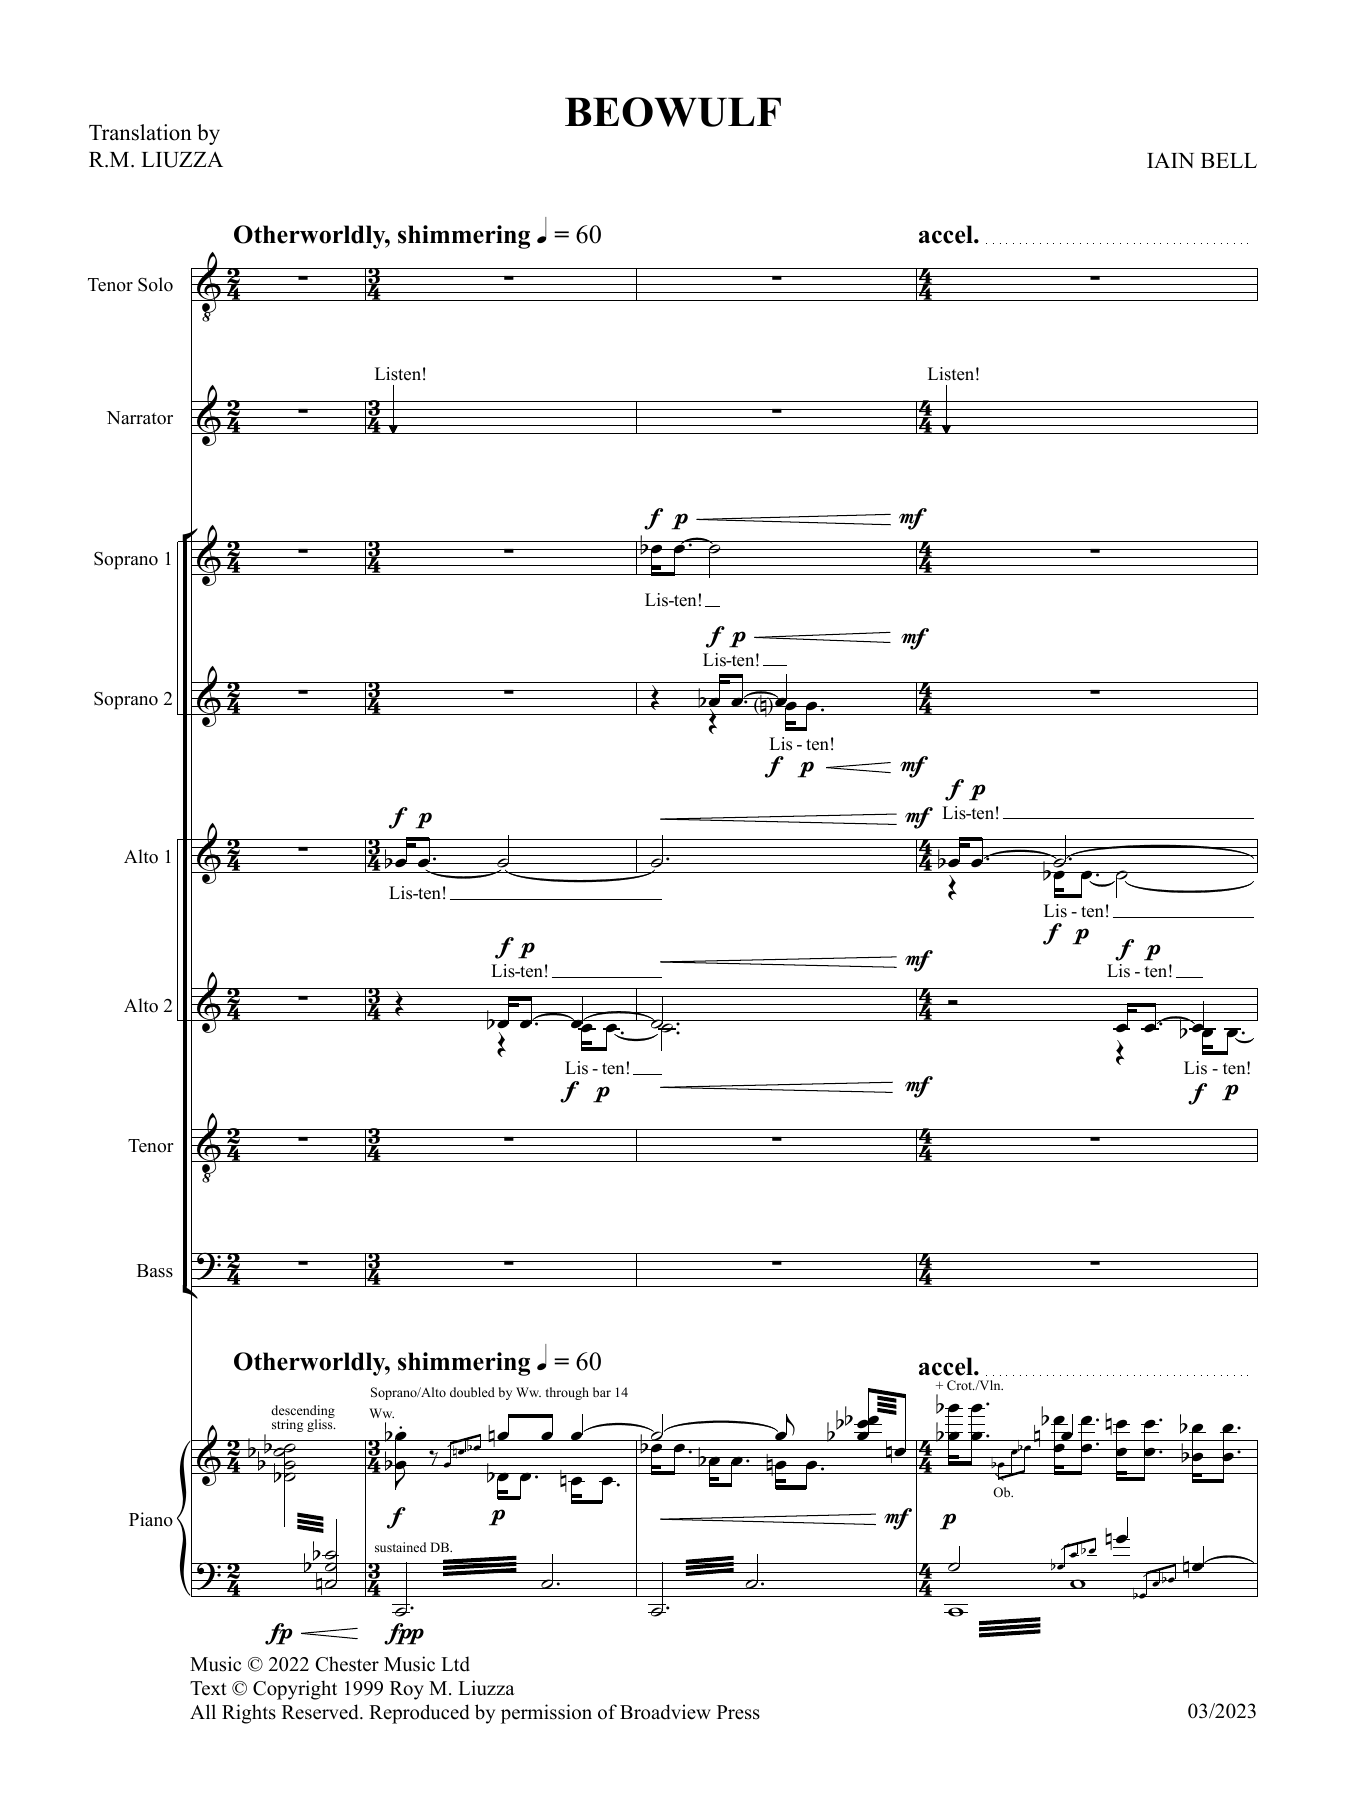 Iain Bell Beowulf (Vocal Score) sheet music notes printable PDF score